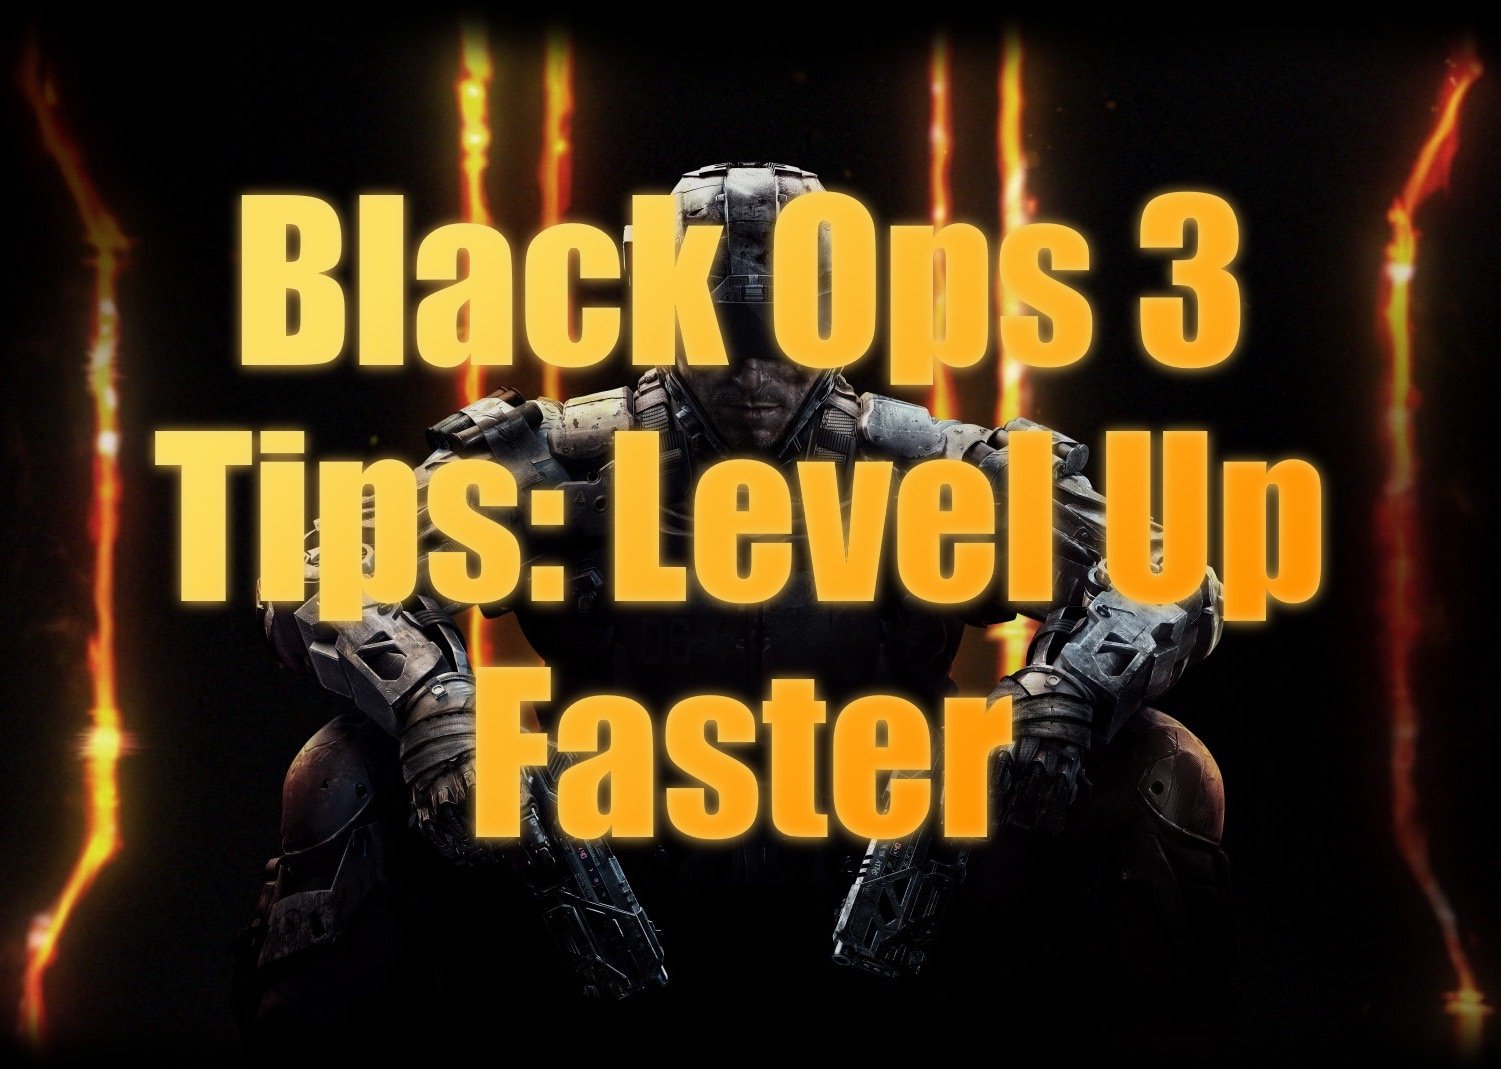 Level up faster in Call of Duty: Black Ops 3 with the essential Black Ops 3 tips and tricks.